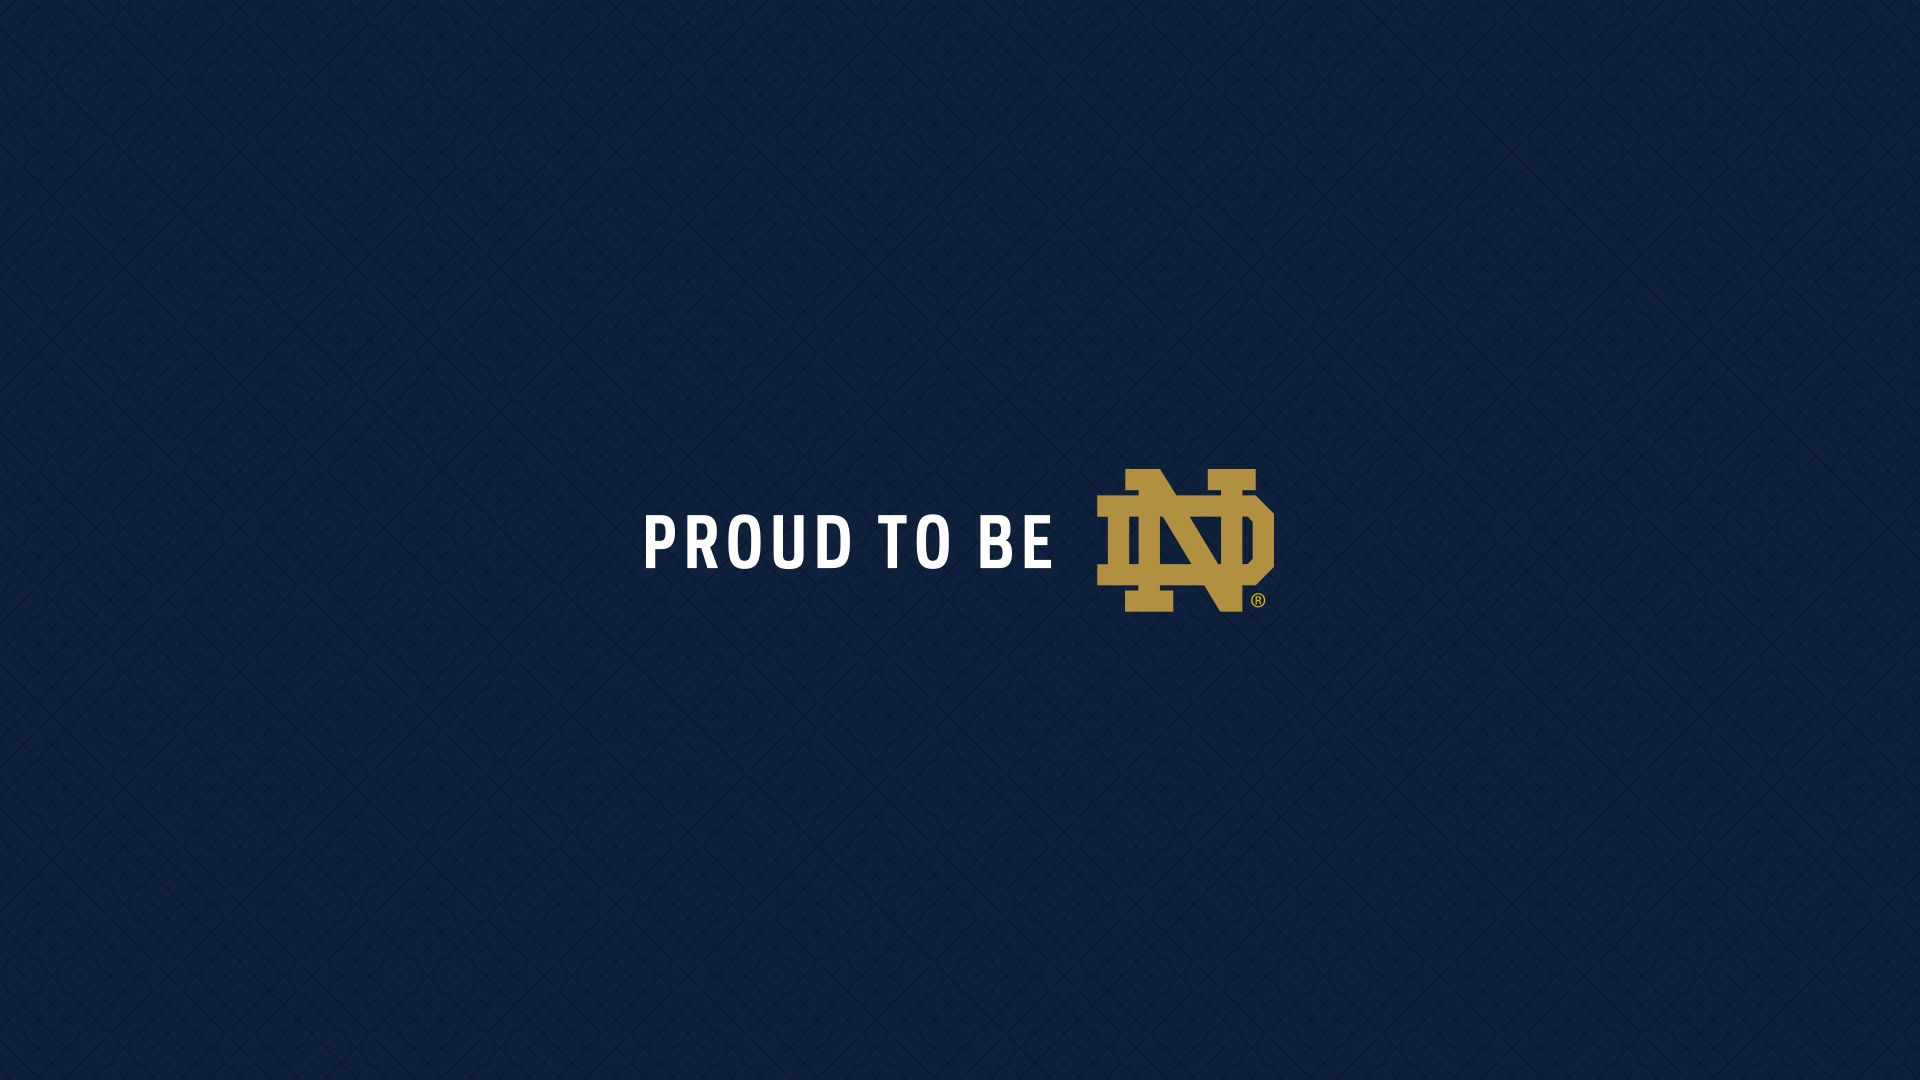 Backgrounds / / Proud to Be ND / / University of Notre Dame